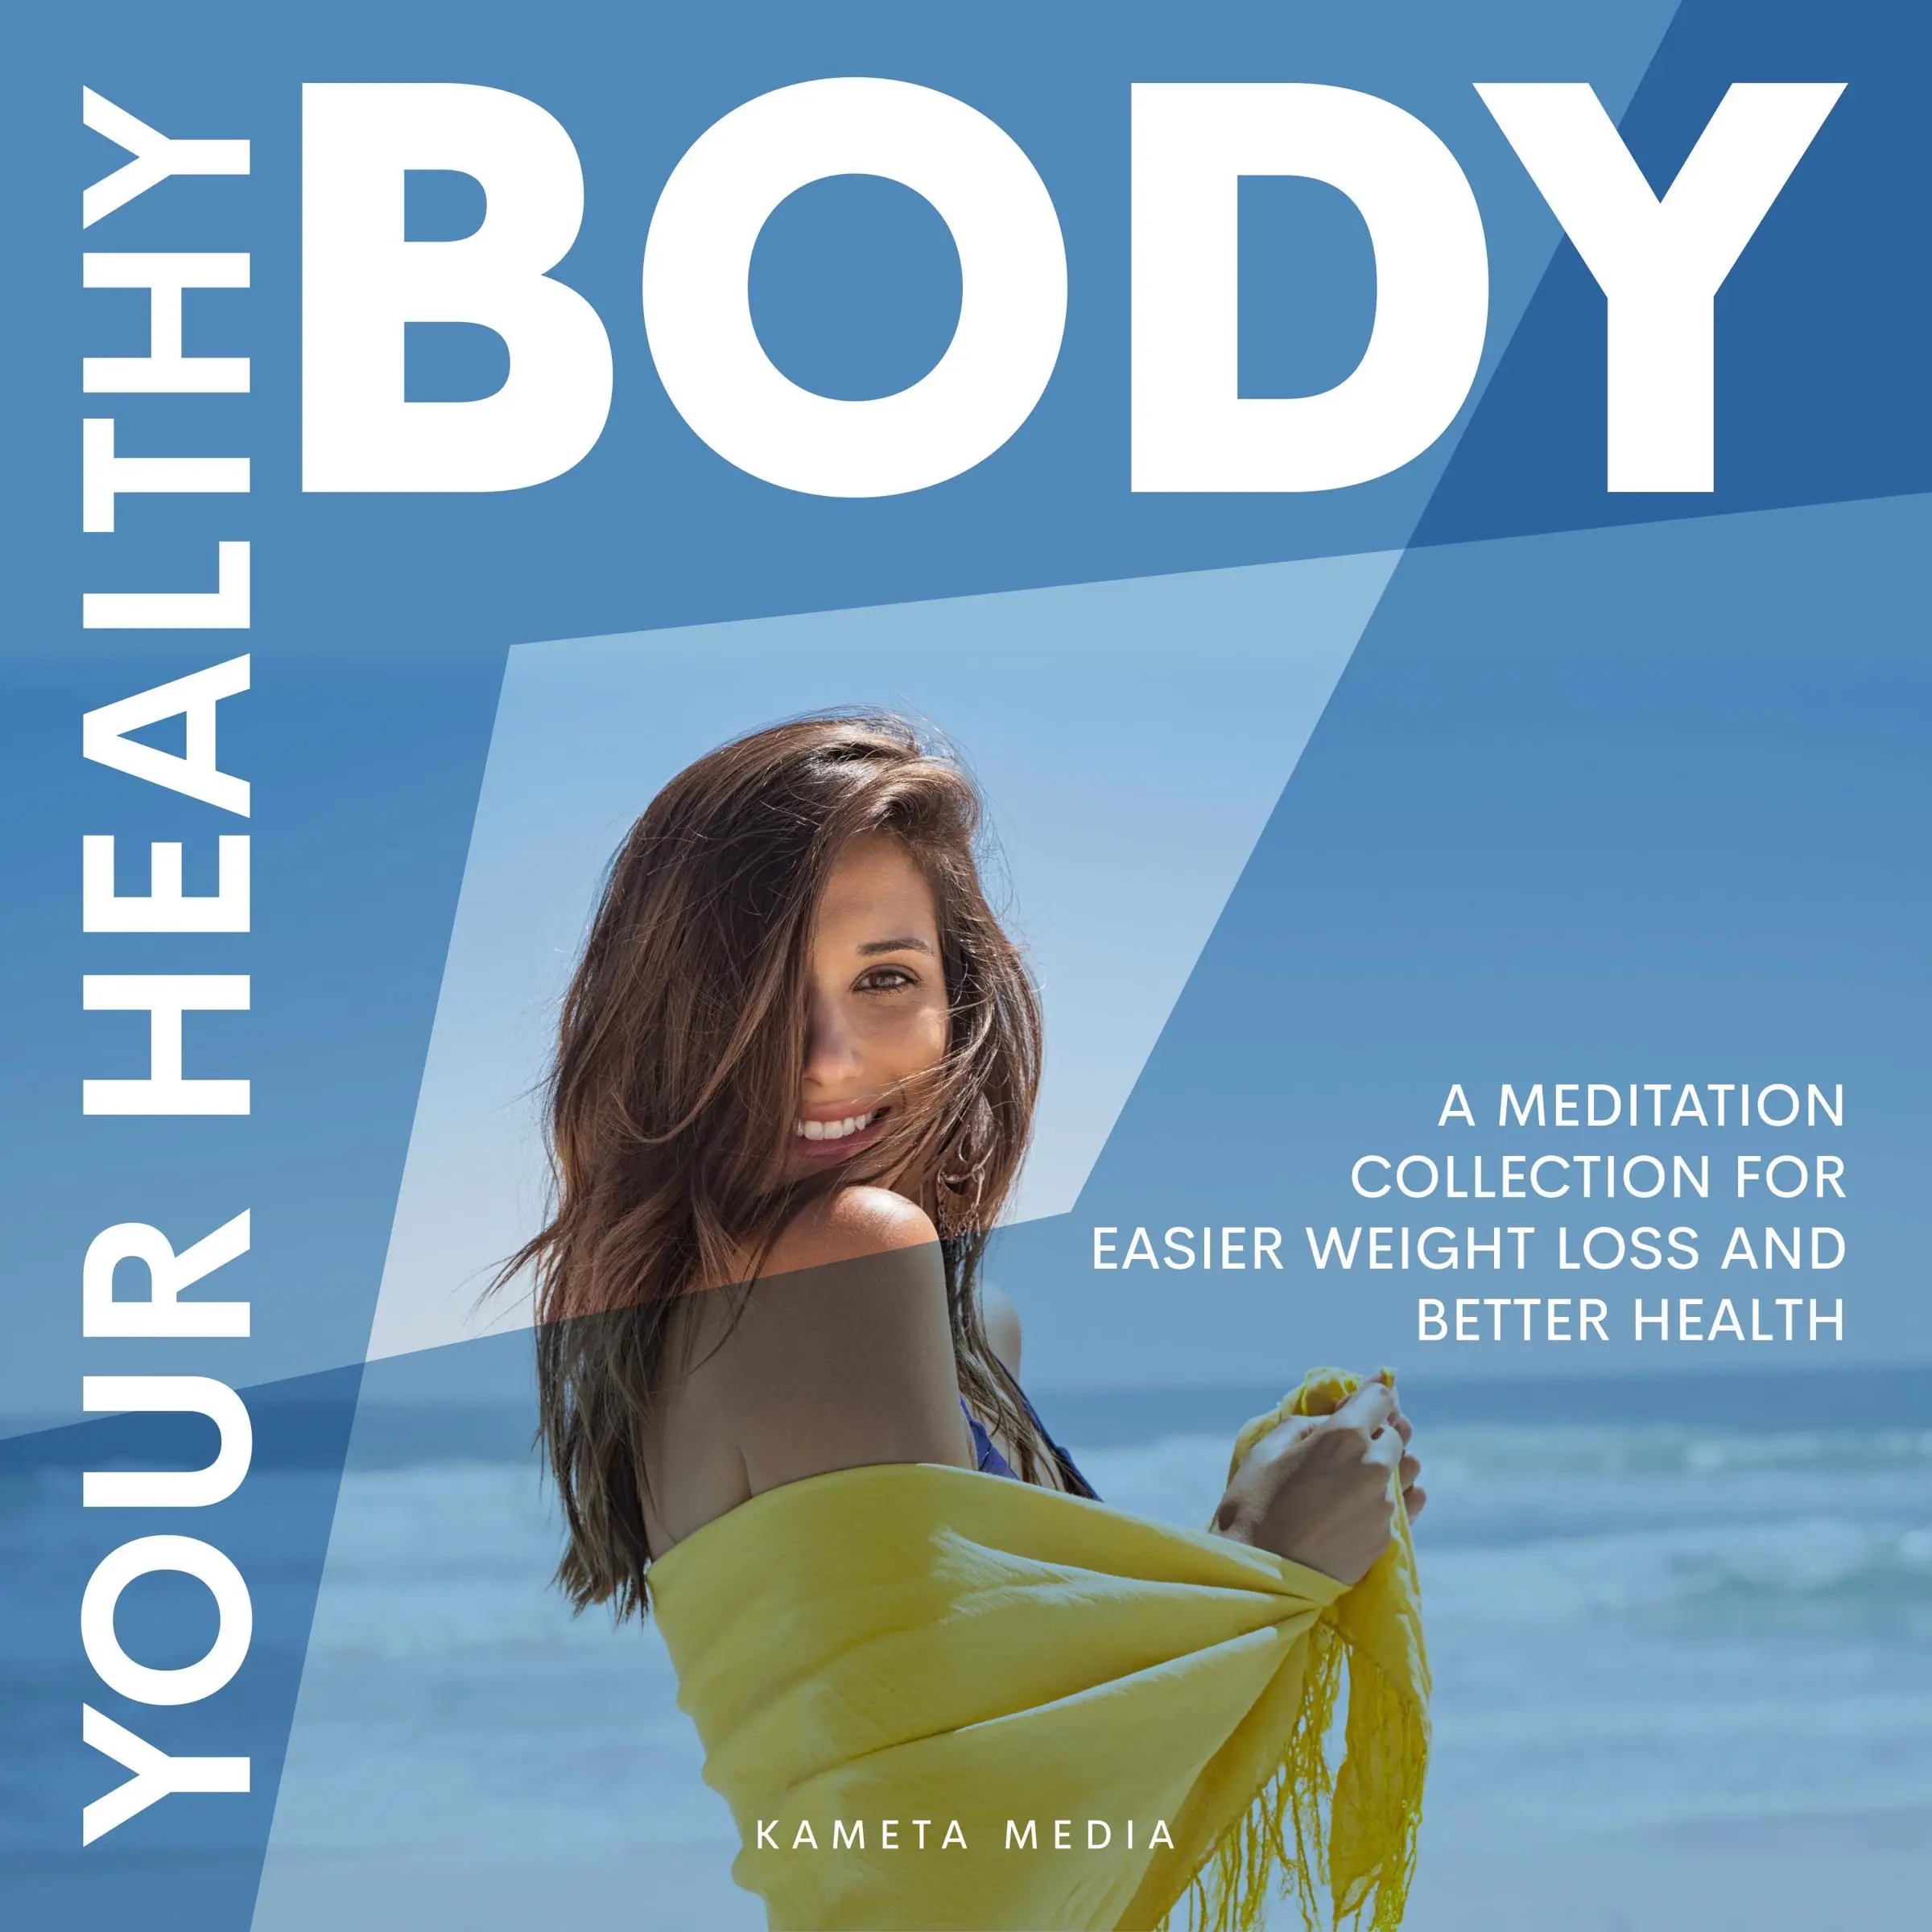 Your Healthy Body: A Meditation Collection for Easier Weight Loss and Better Health Audiobook by Kameta Media